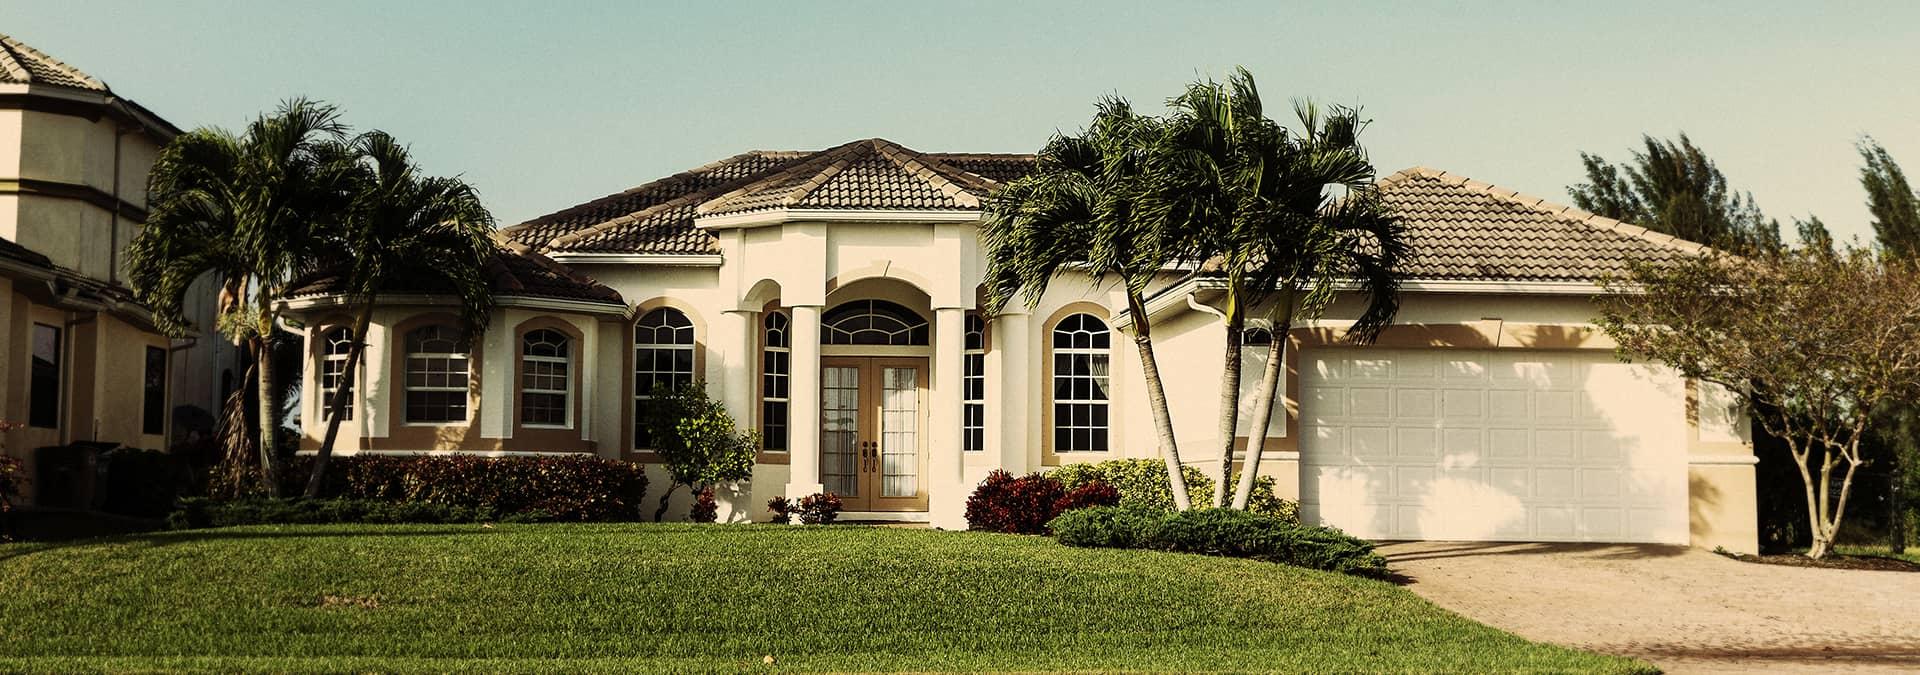 street view of a home located in palm valley florida